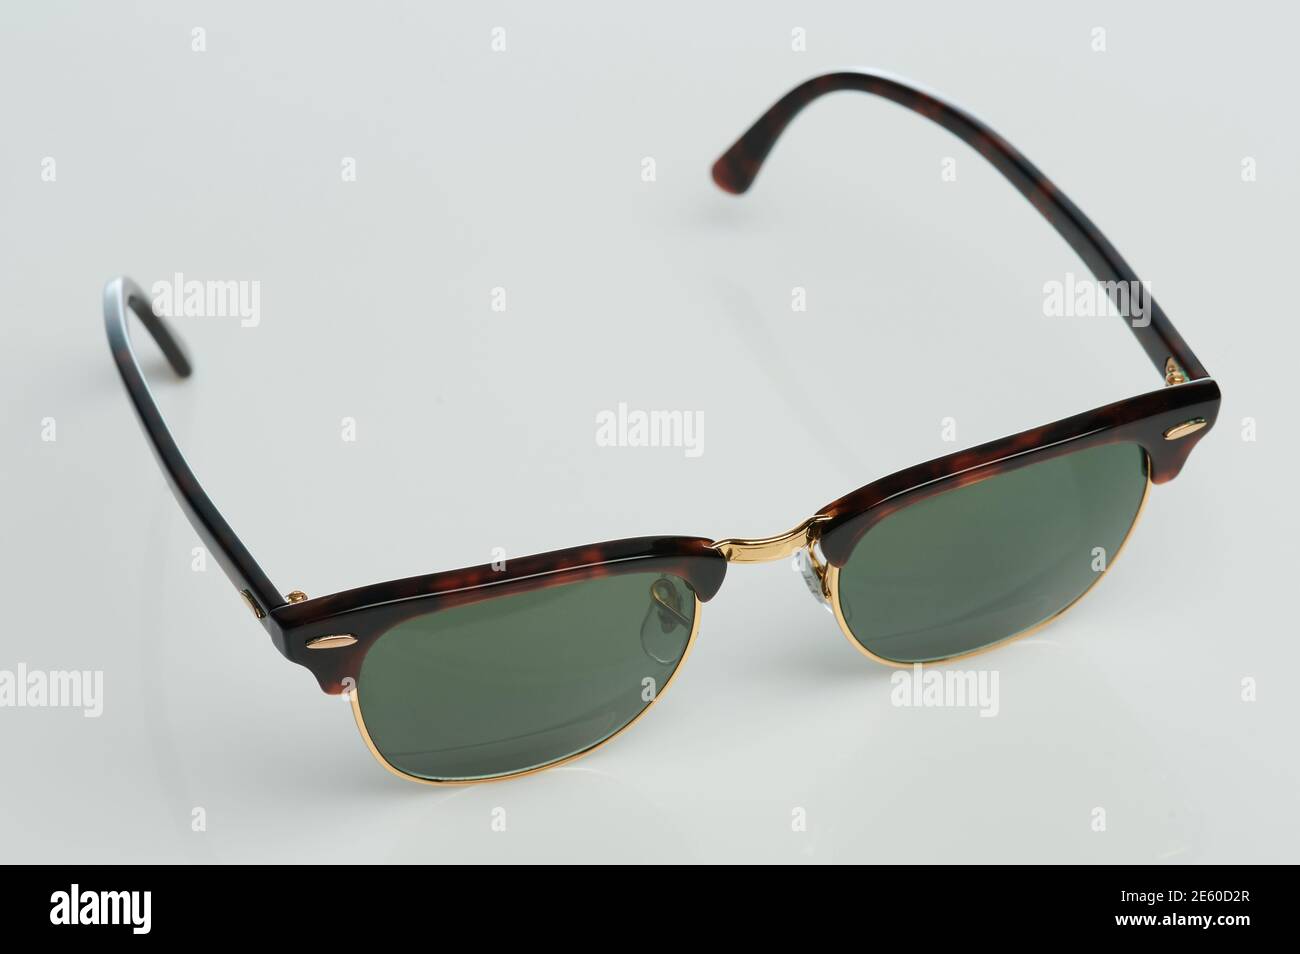 Brown sunglasses frame isometric view isolated. Stylish glasses Stock Photo